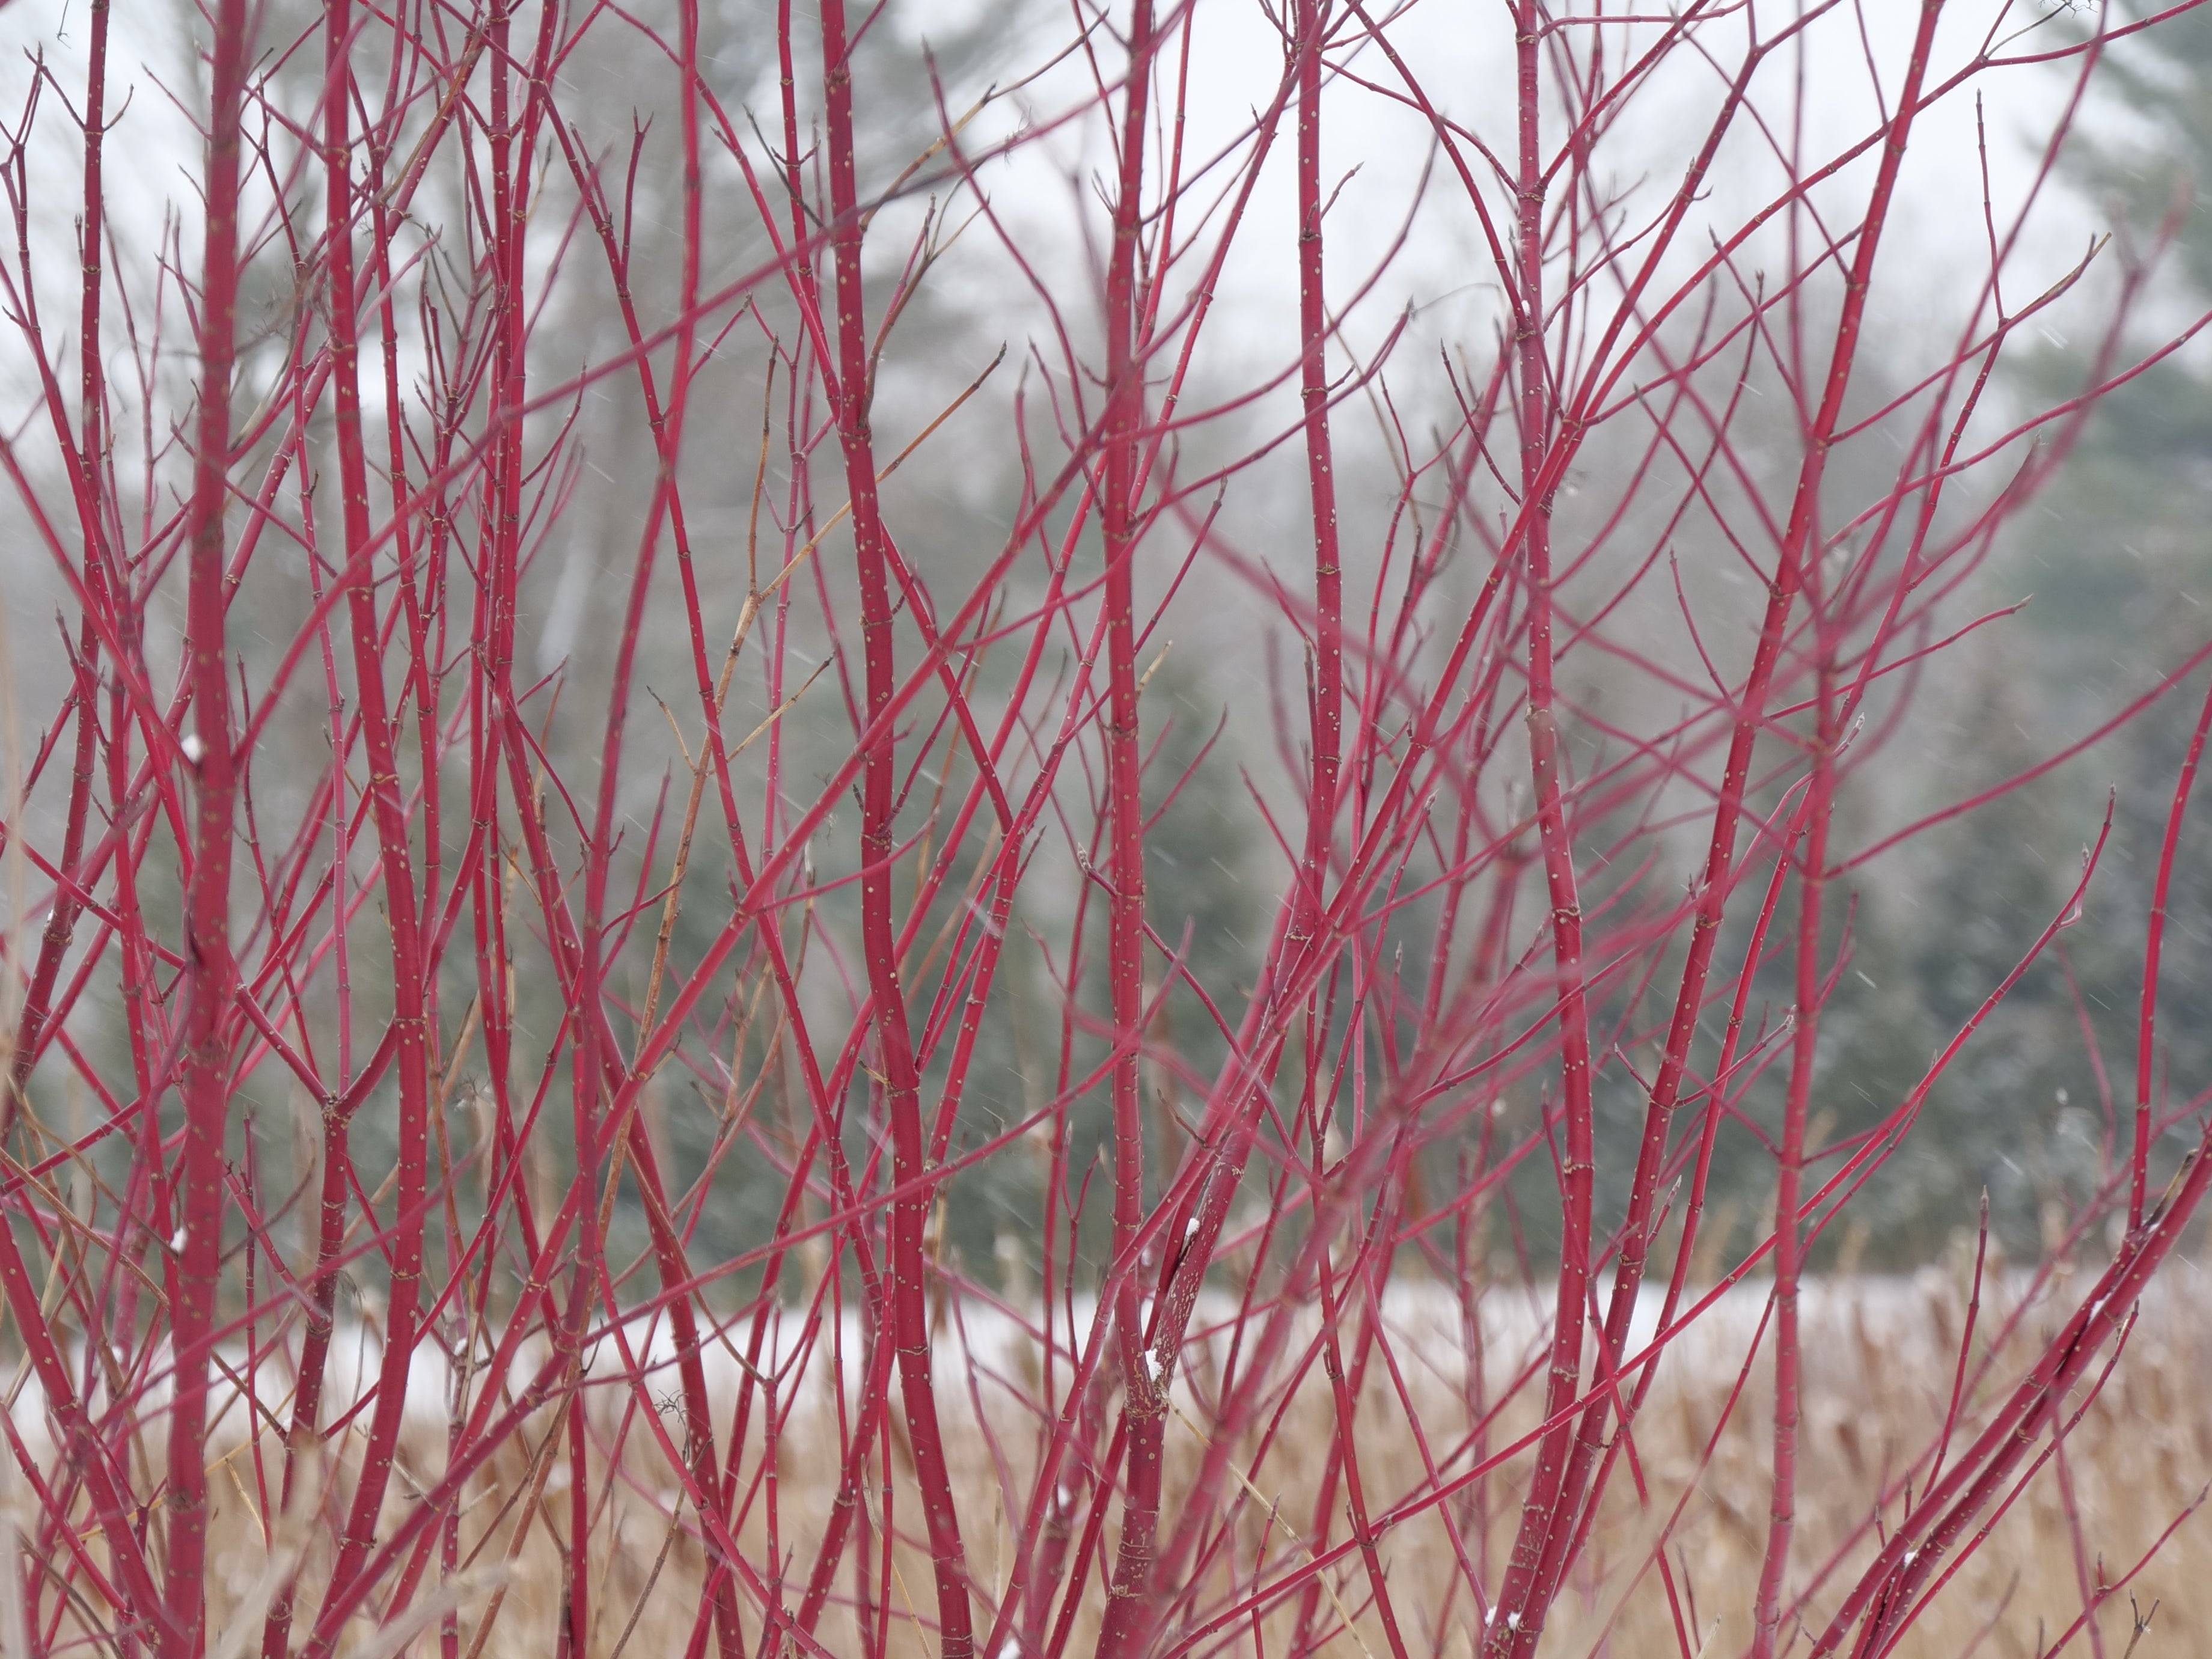 Closeup of the nice red stems of Arctic Fire Red dogwood